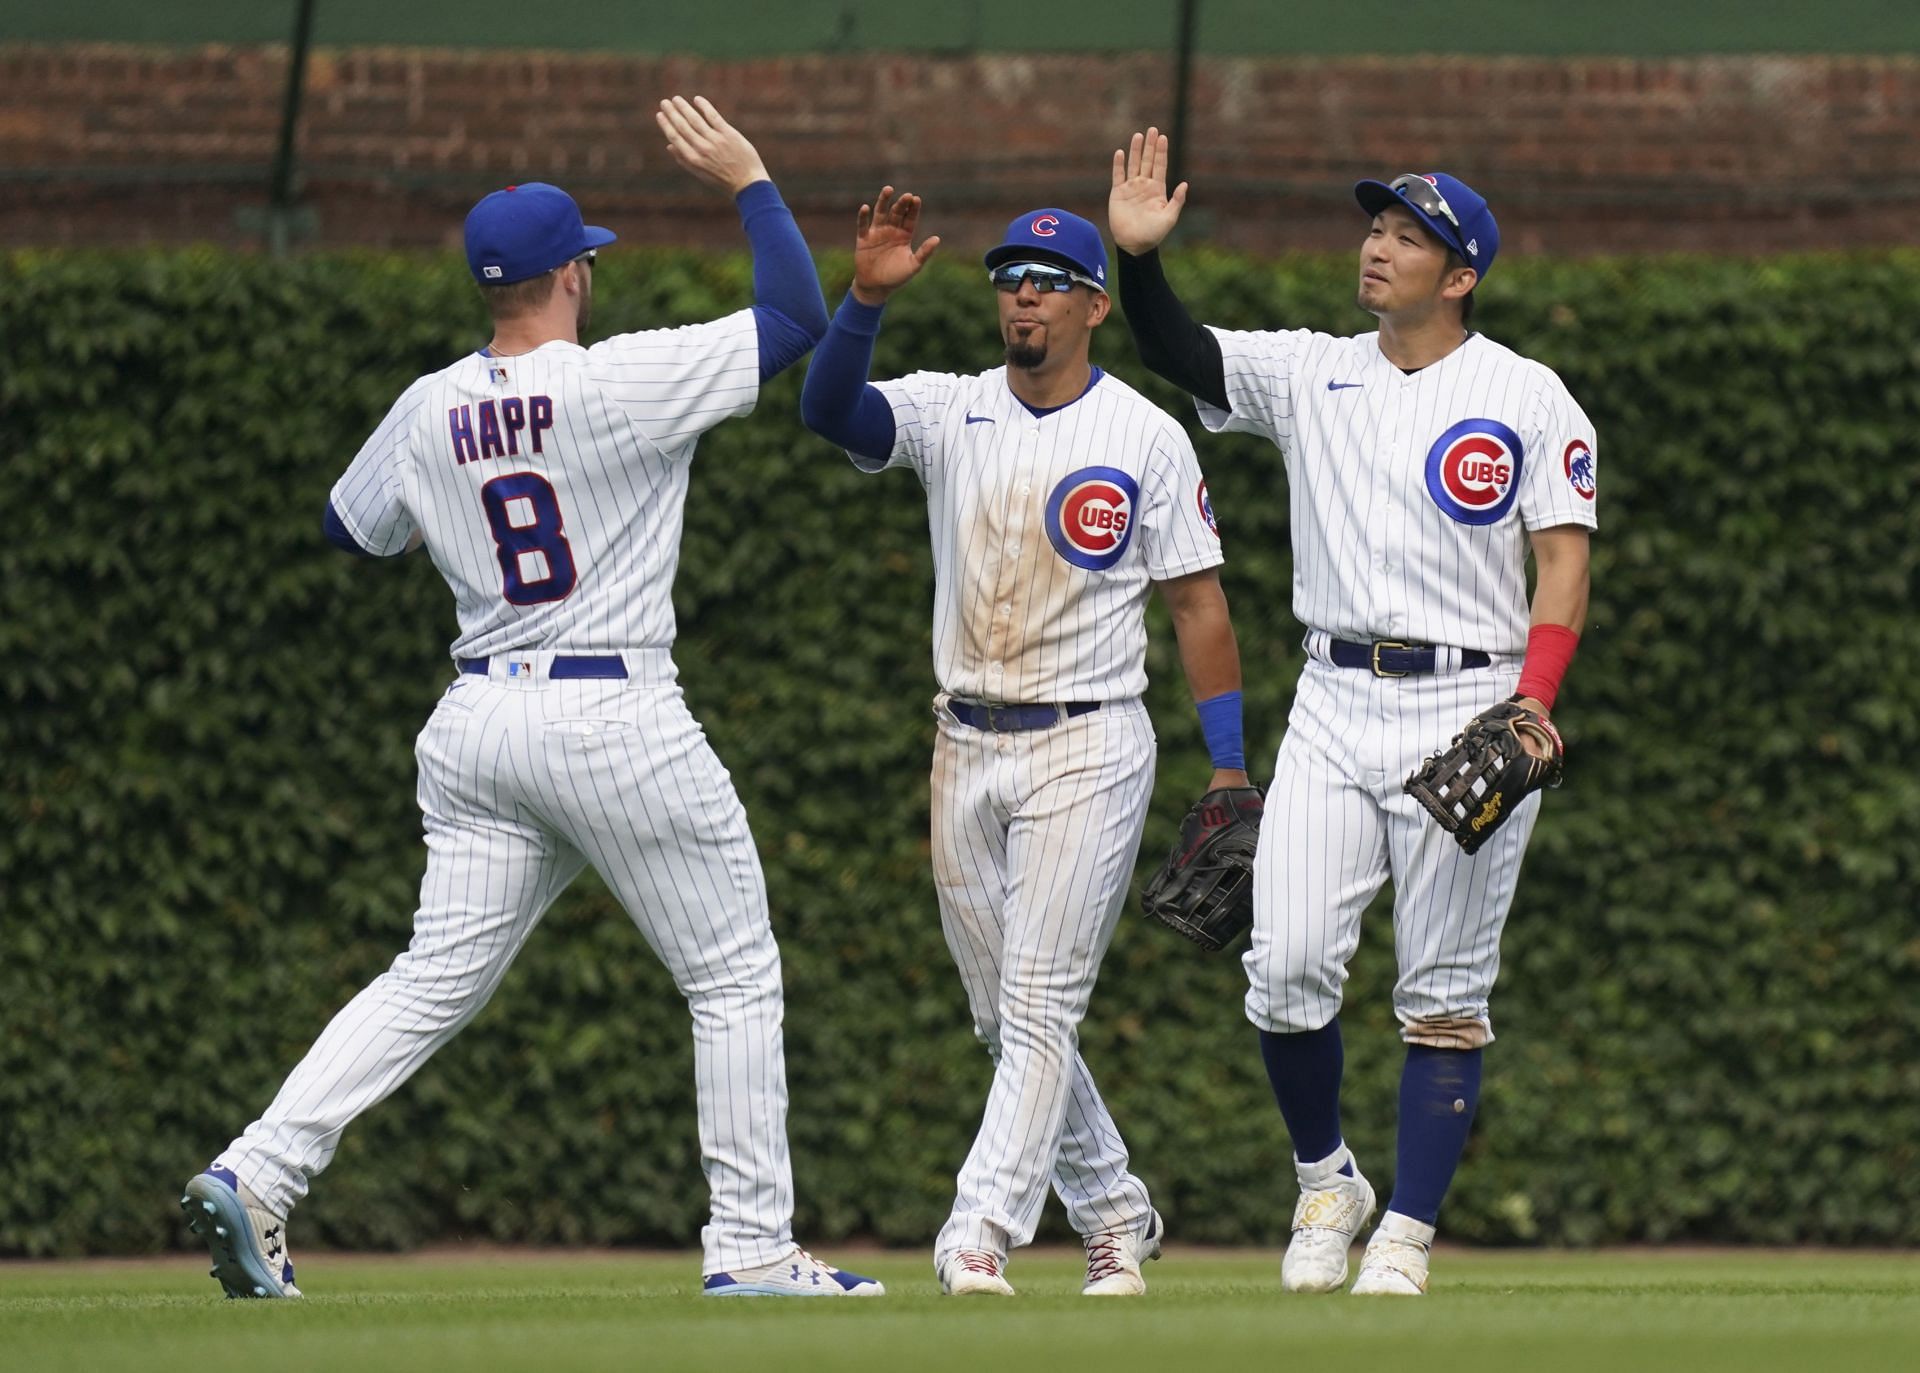 Ian Happ (left), Christopher Morel (center) and Seiya Suzuki (right) celebrate a win against the Pittsburgh Pirates at Wrigley Field in Chicago, Illinois.